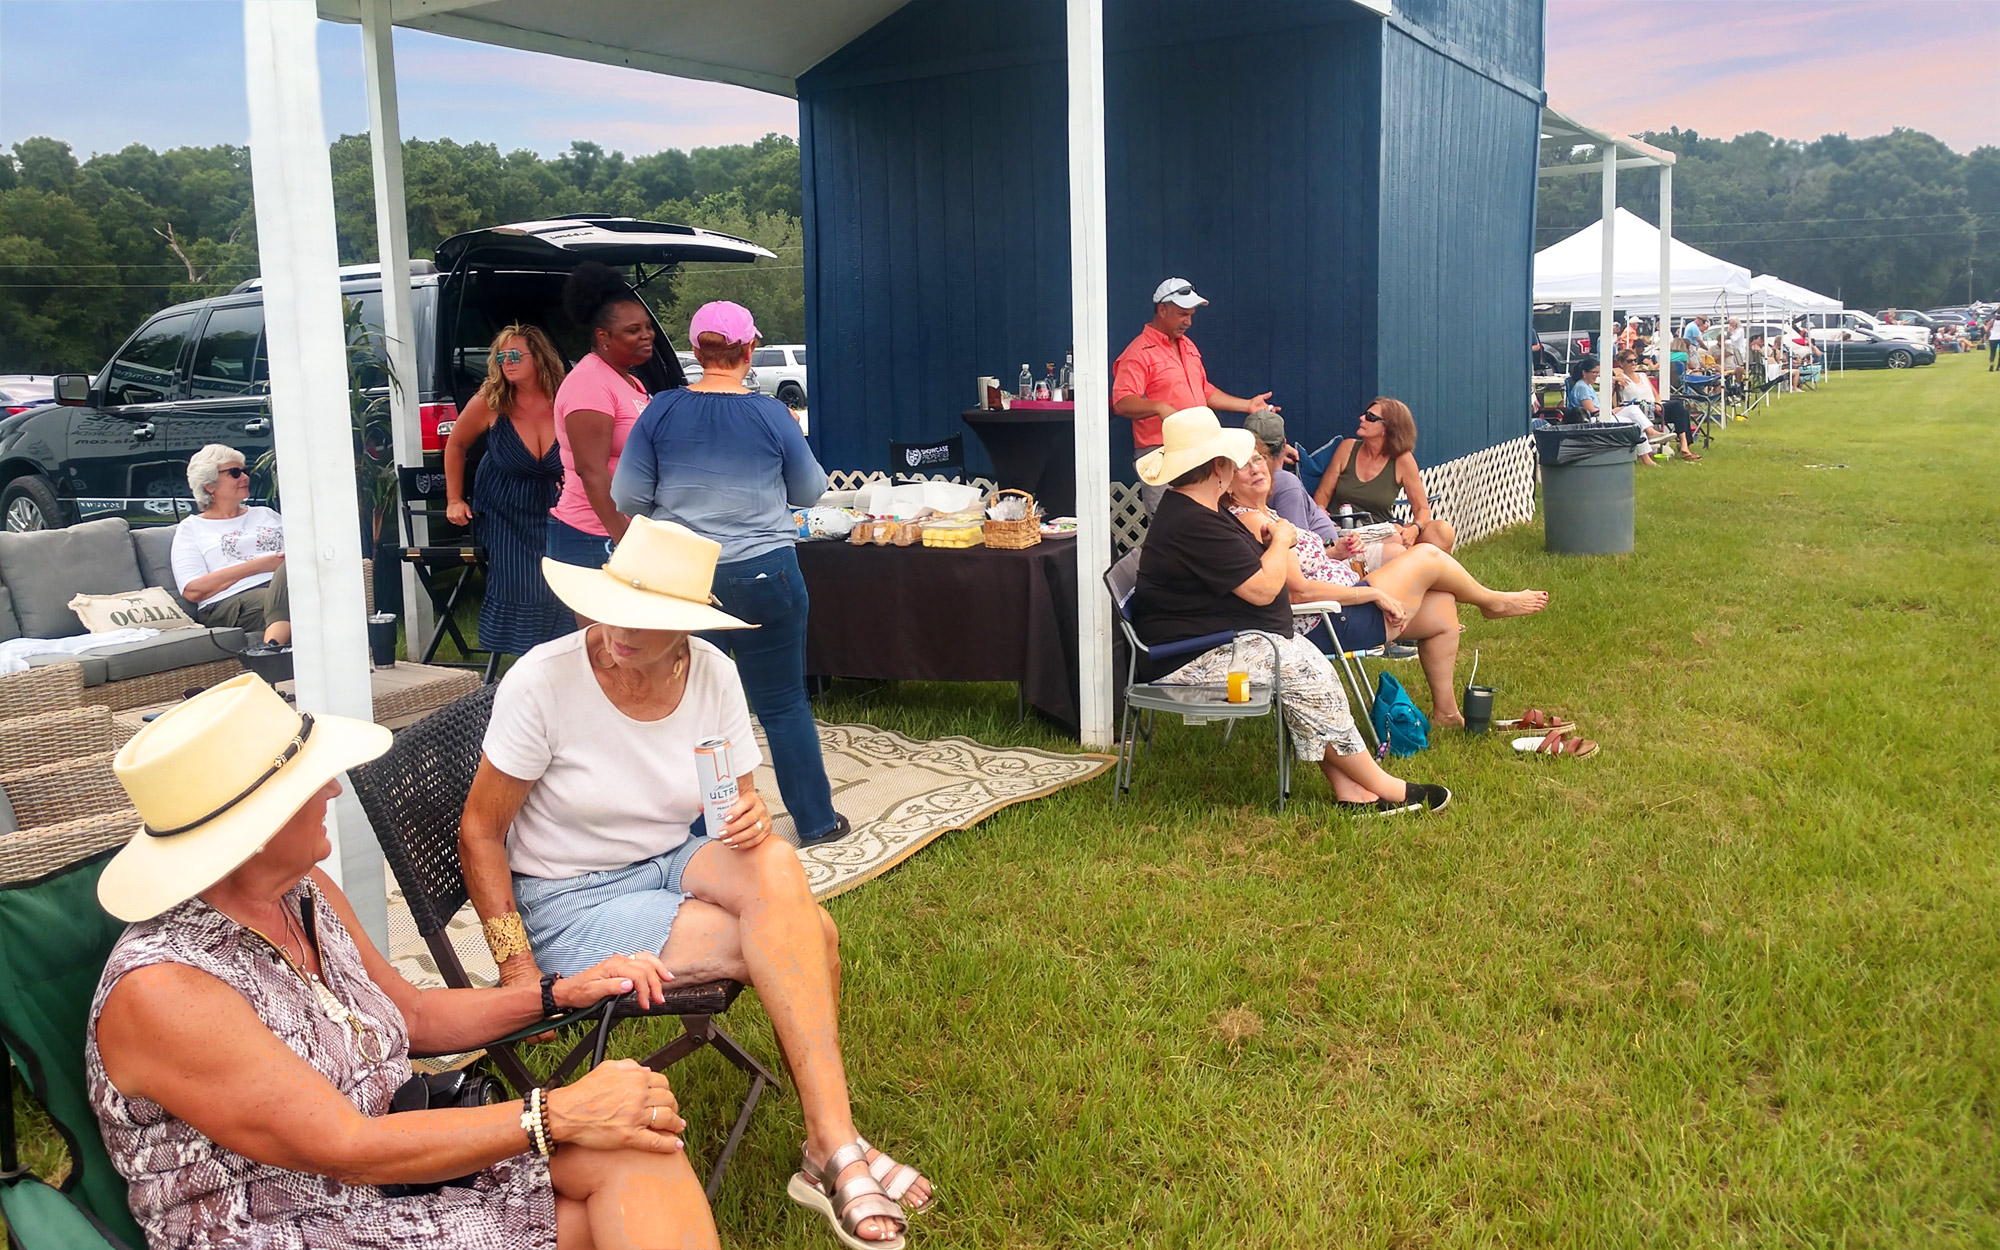 Spectators cheering on the polo match.